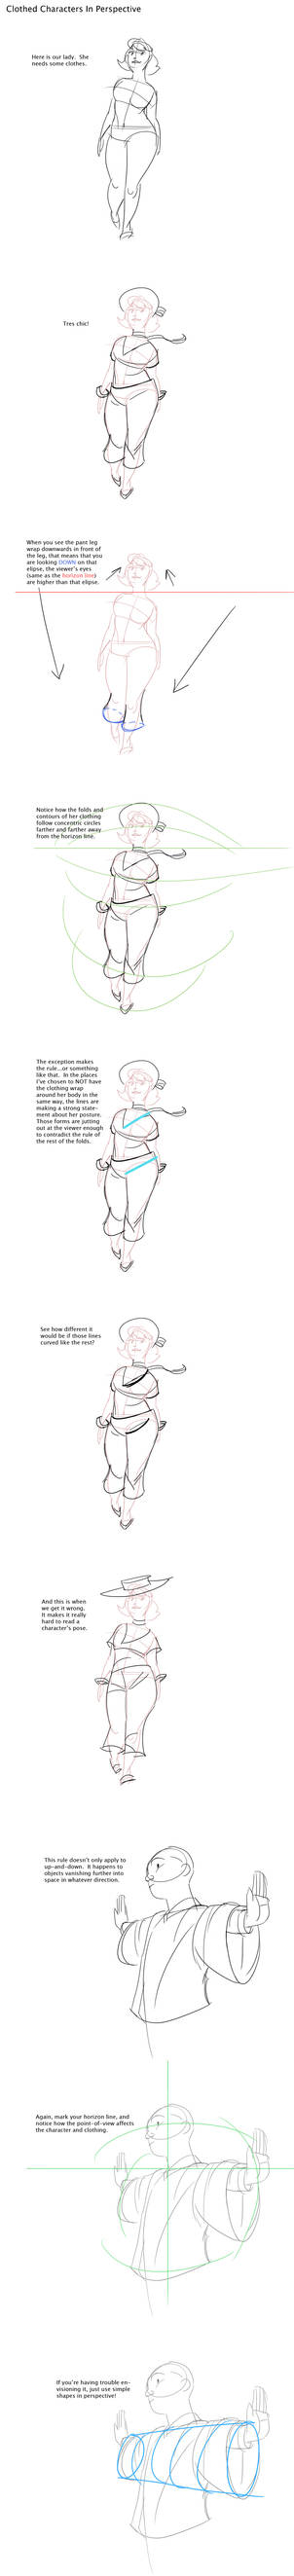 Clothed Characters in Perspective